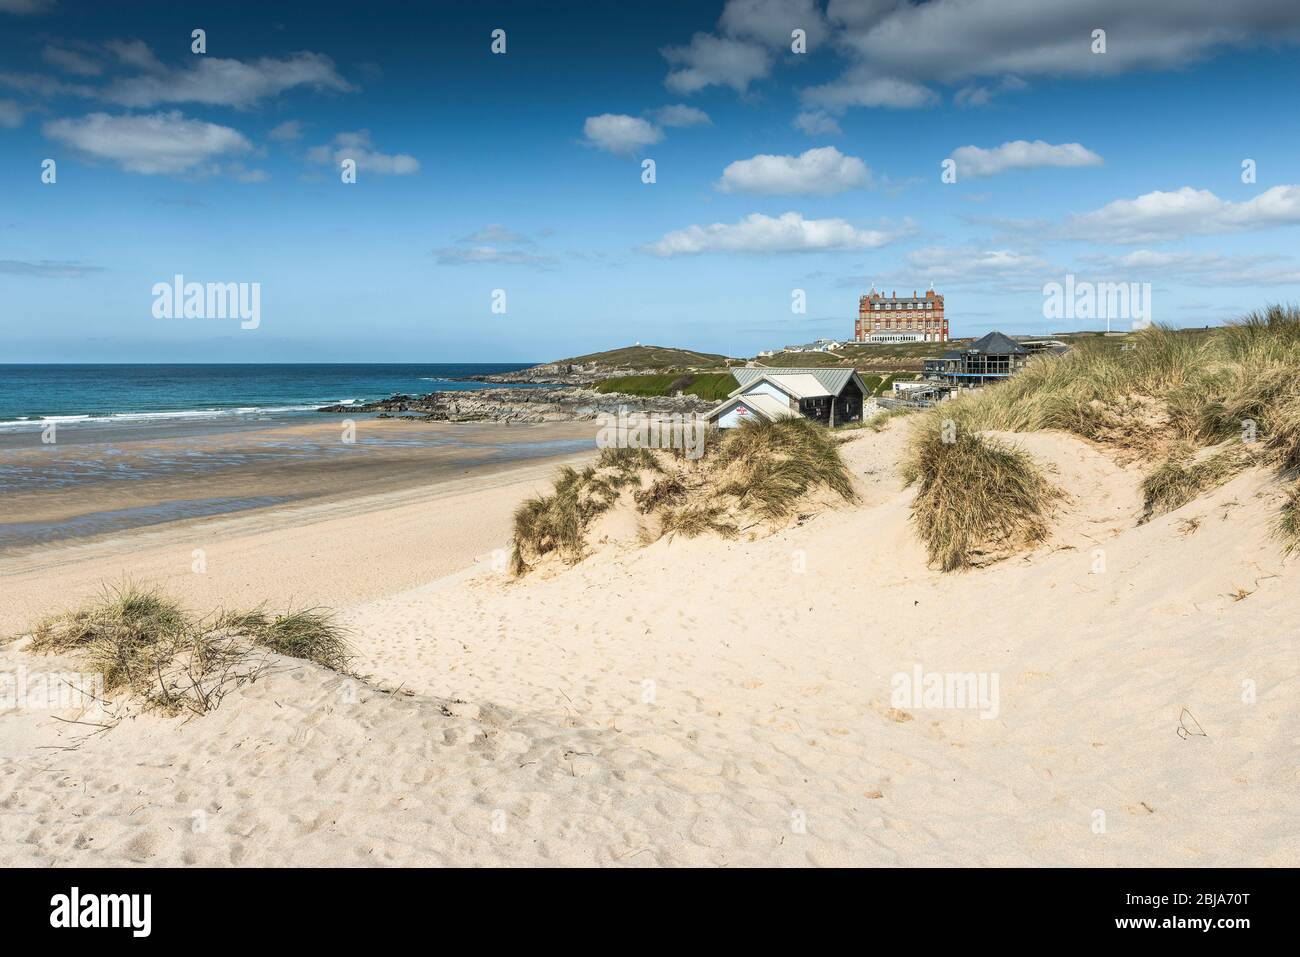 Due to the Coronavirus Covid-19 lock down a normally busy Fistral Beach is totally deserted in Newquay in Cornwall. Stock Photo